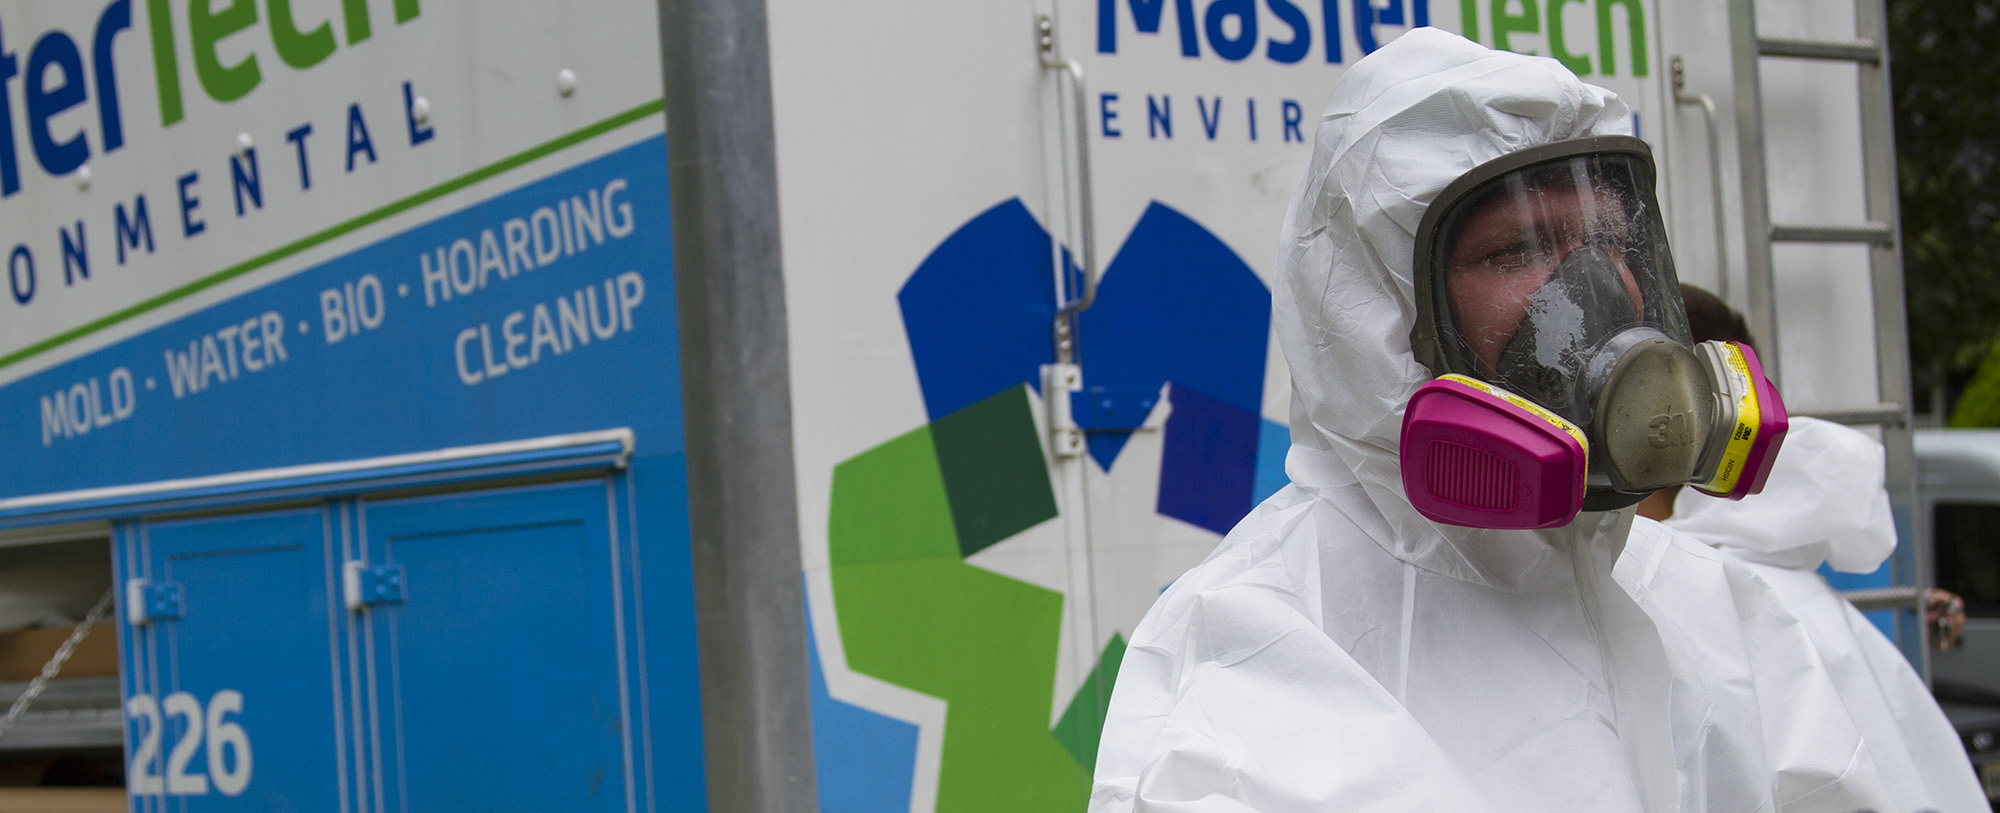 10 Tips For Choosing a Biohazard Cleanup & Environmental Services